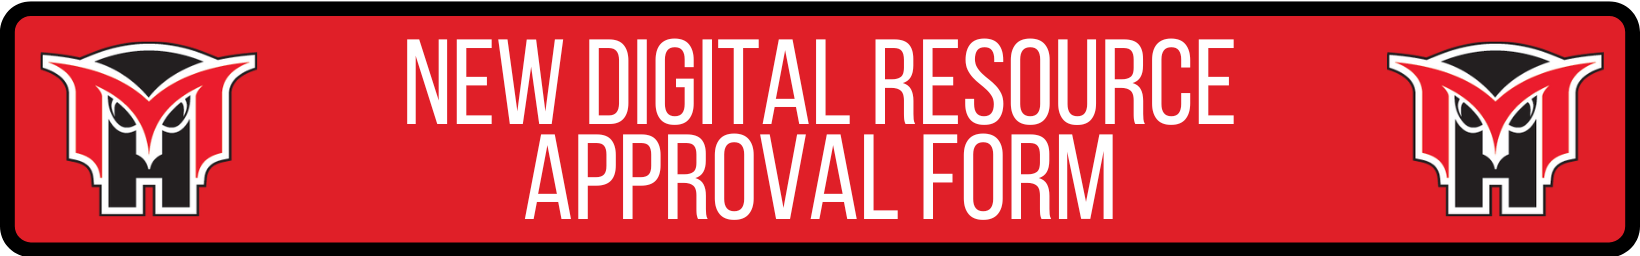 new digital resource approval form